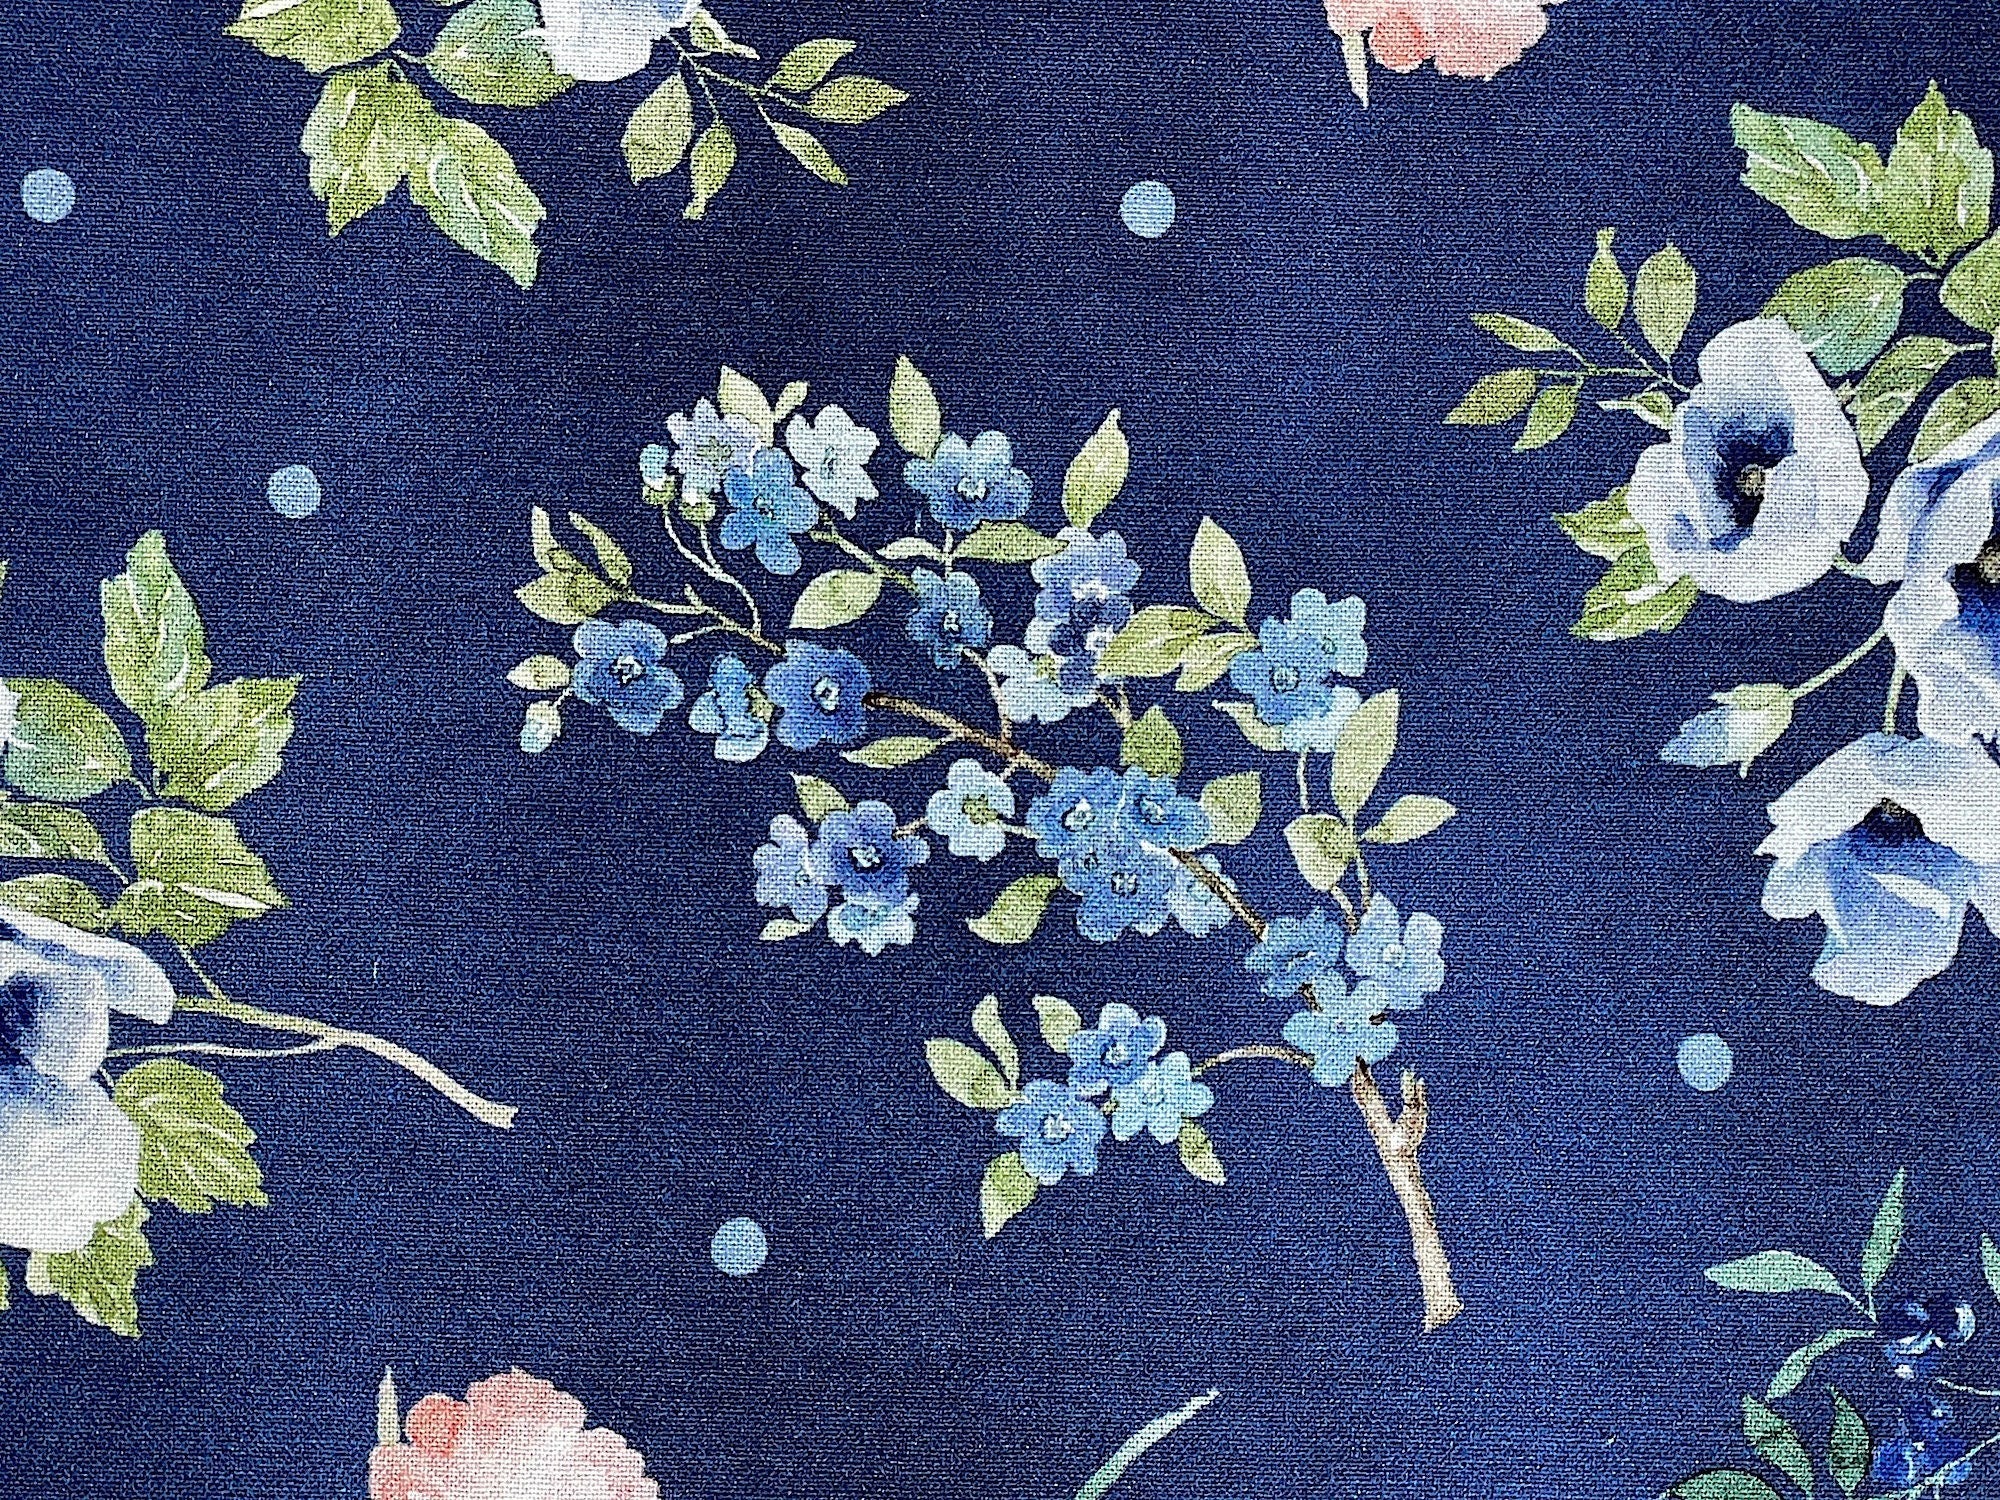 This fabric is part of the Indigo Petals collection by Beth Grove. This blue fabric is covered with blue and pink flowers, green leaves and blue butterflies.